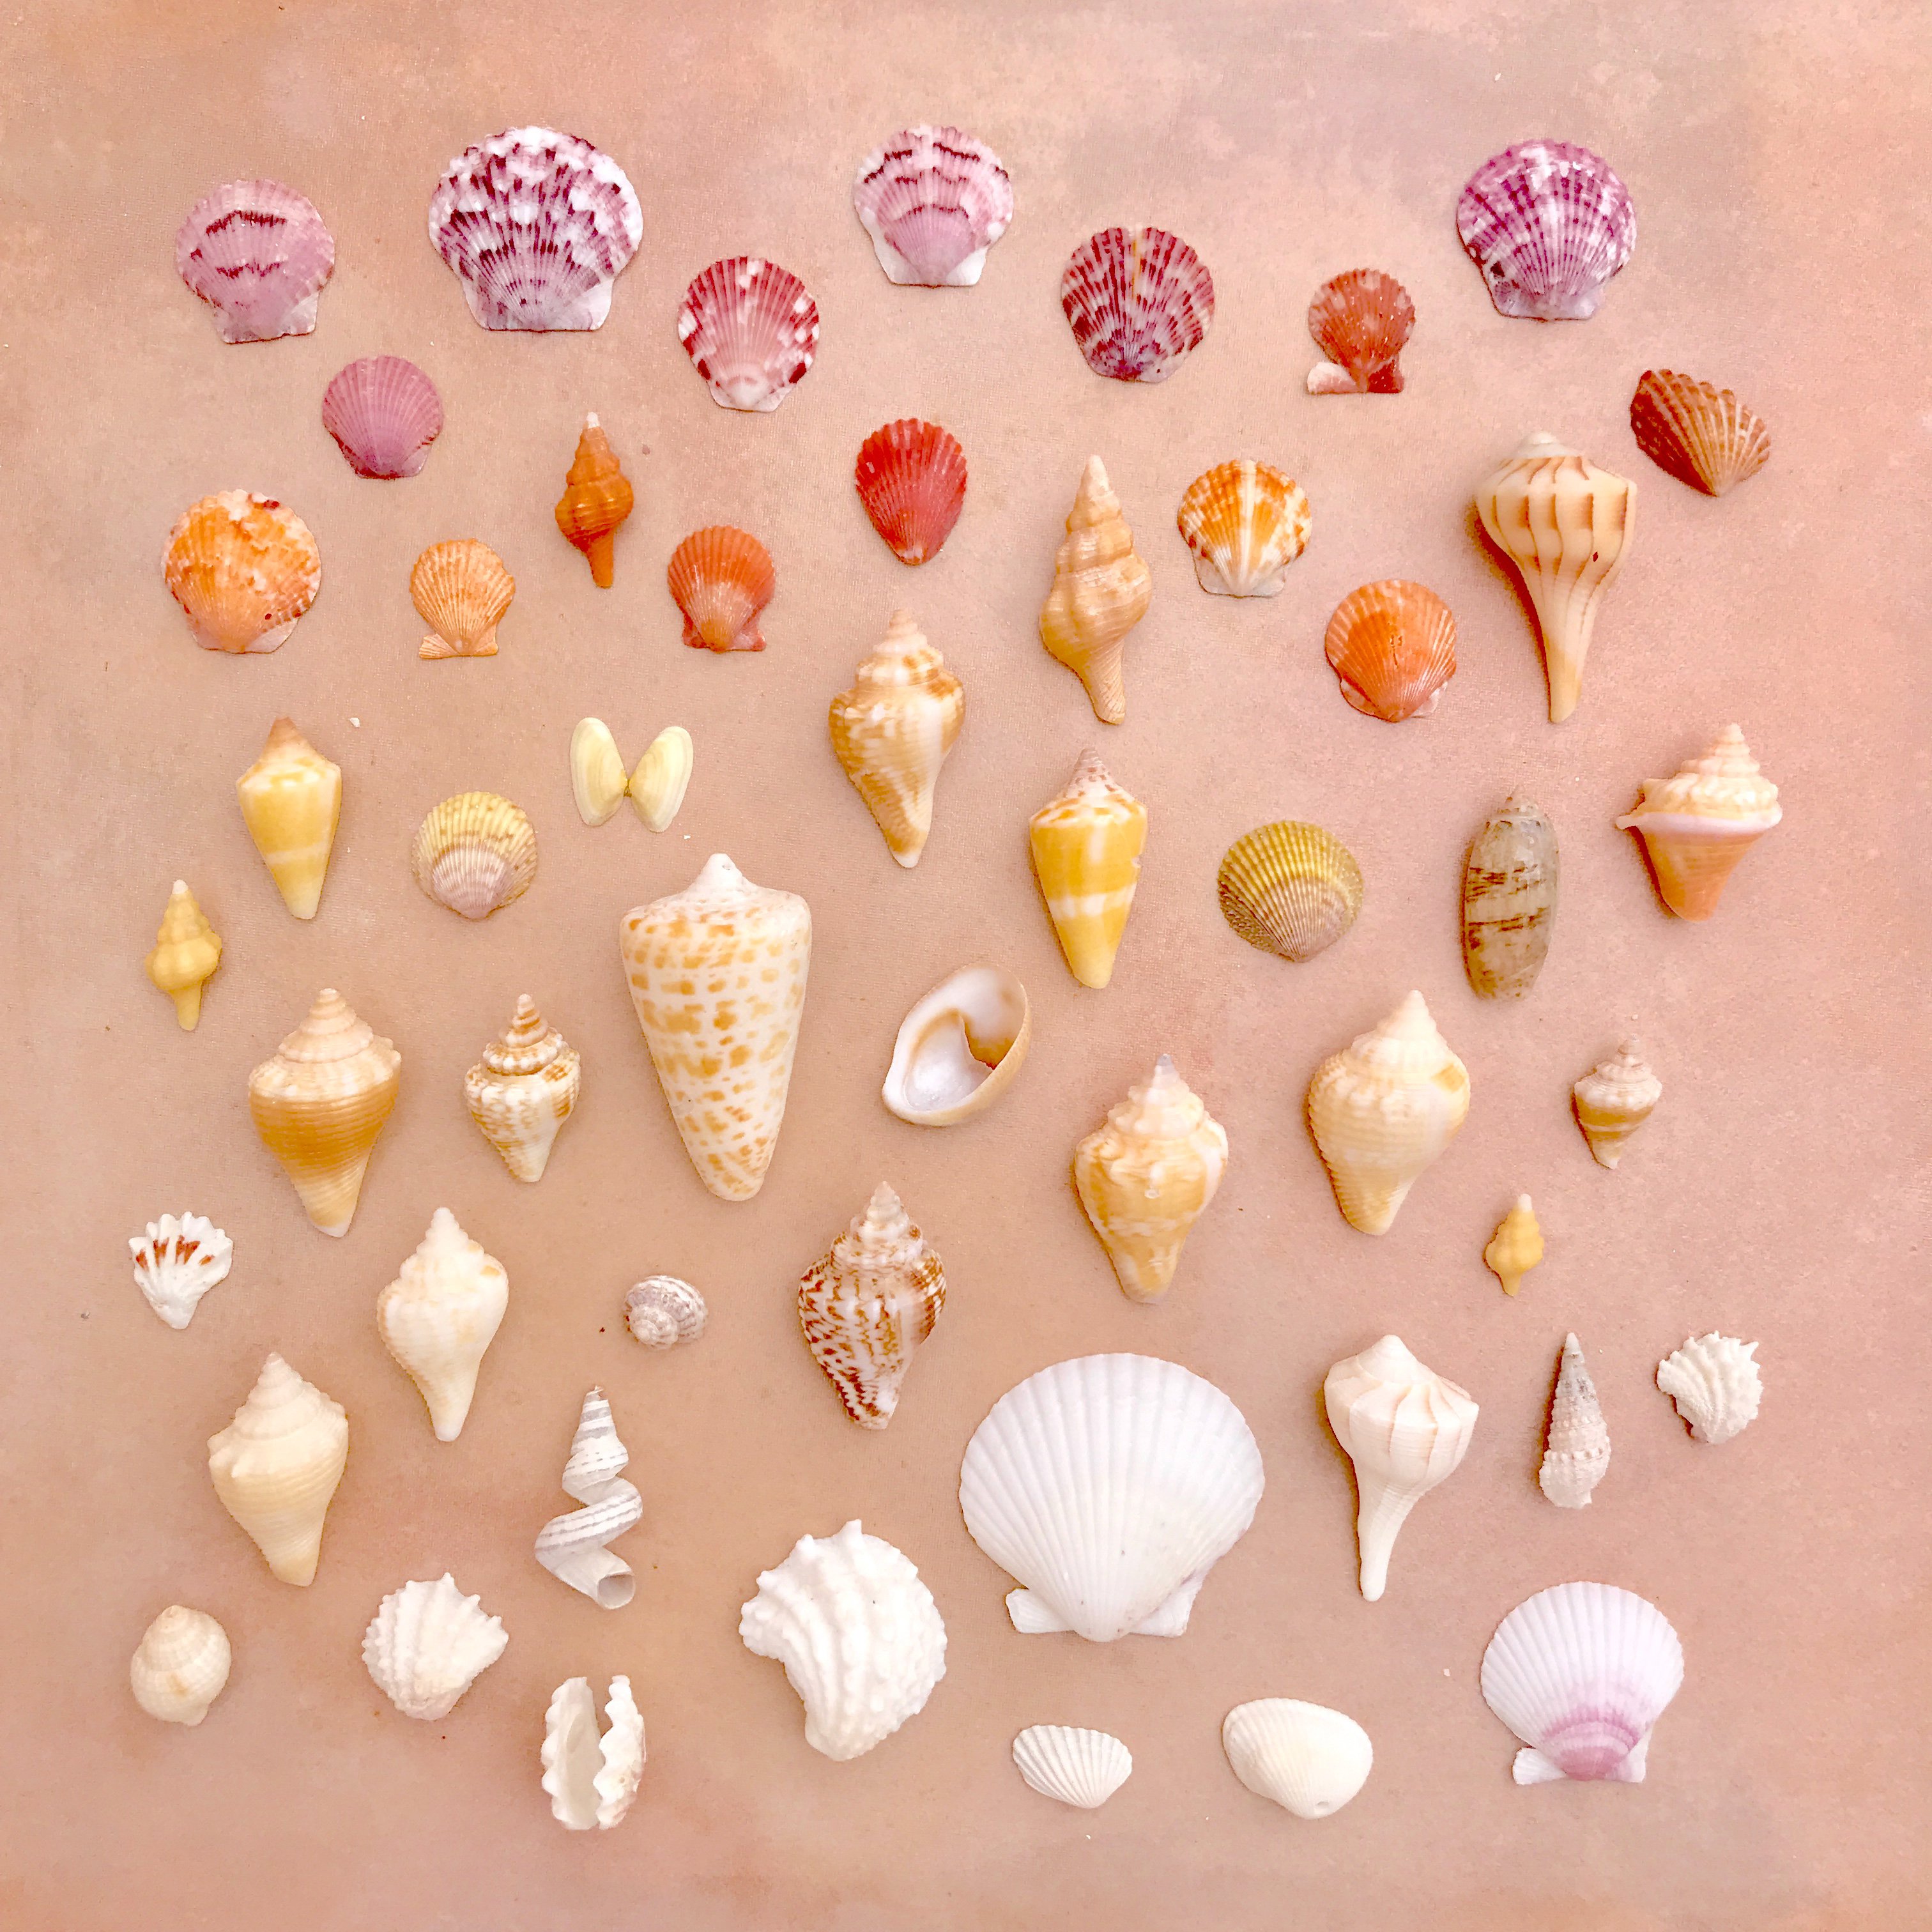 Sanibel Shell Collecting - Beaches, Parking, Shells - Seatail